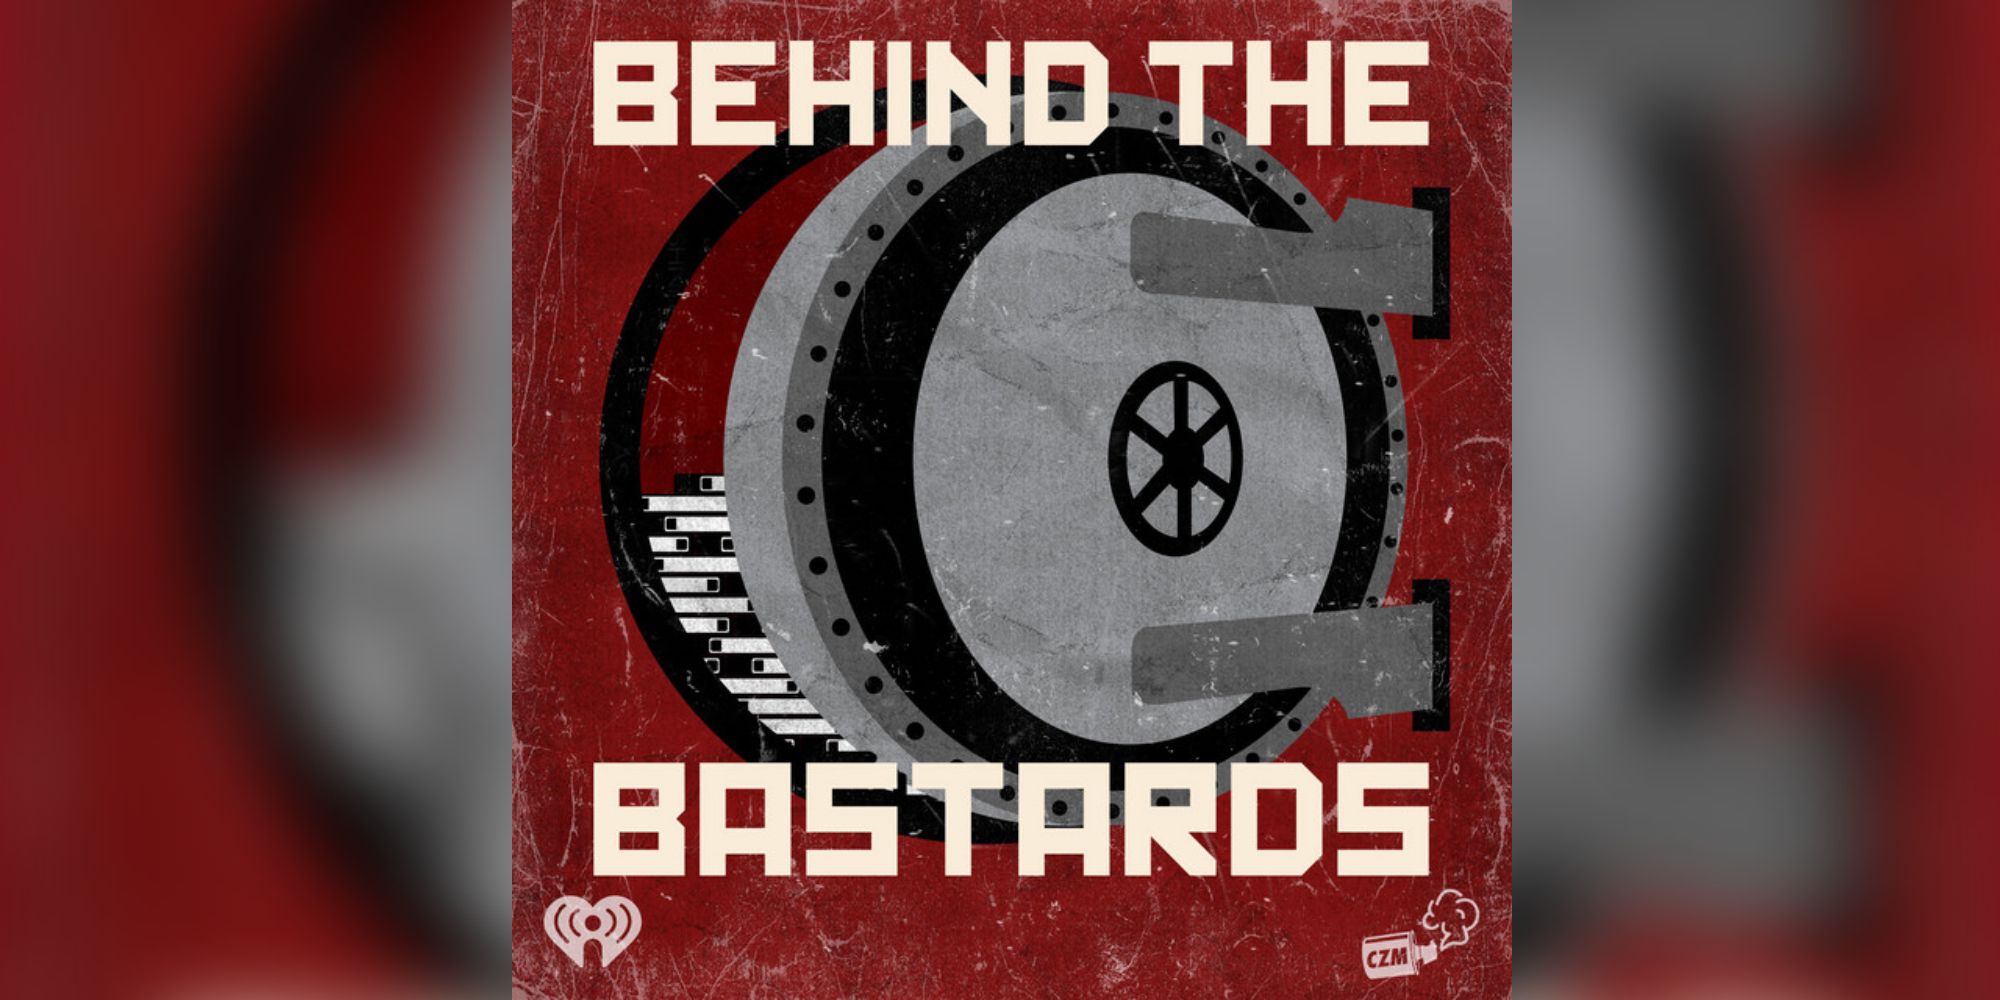 Behind the Bastards cover art